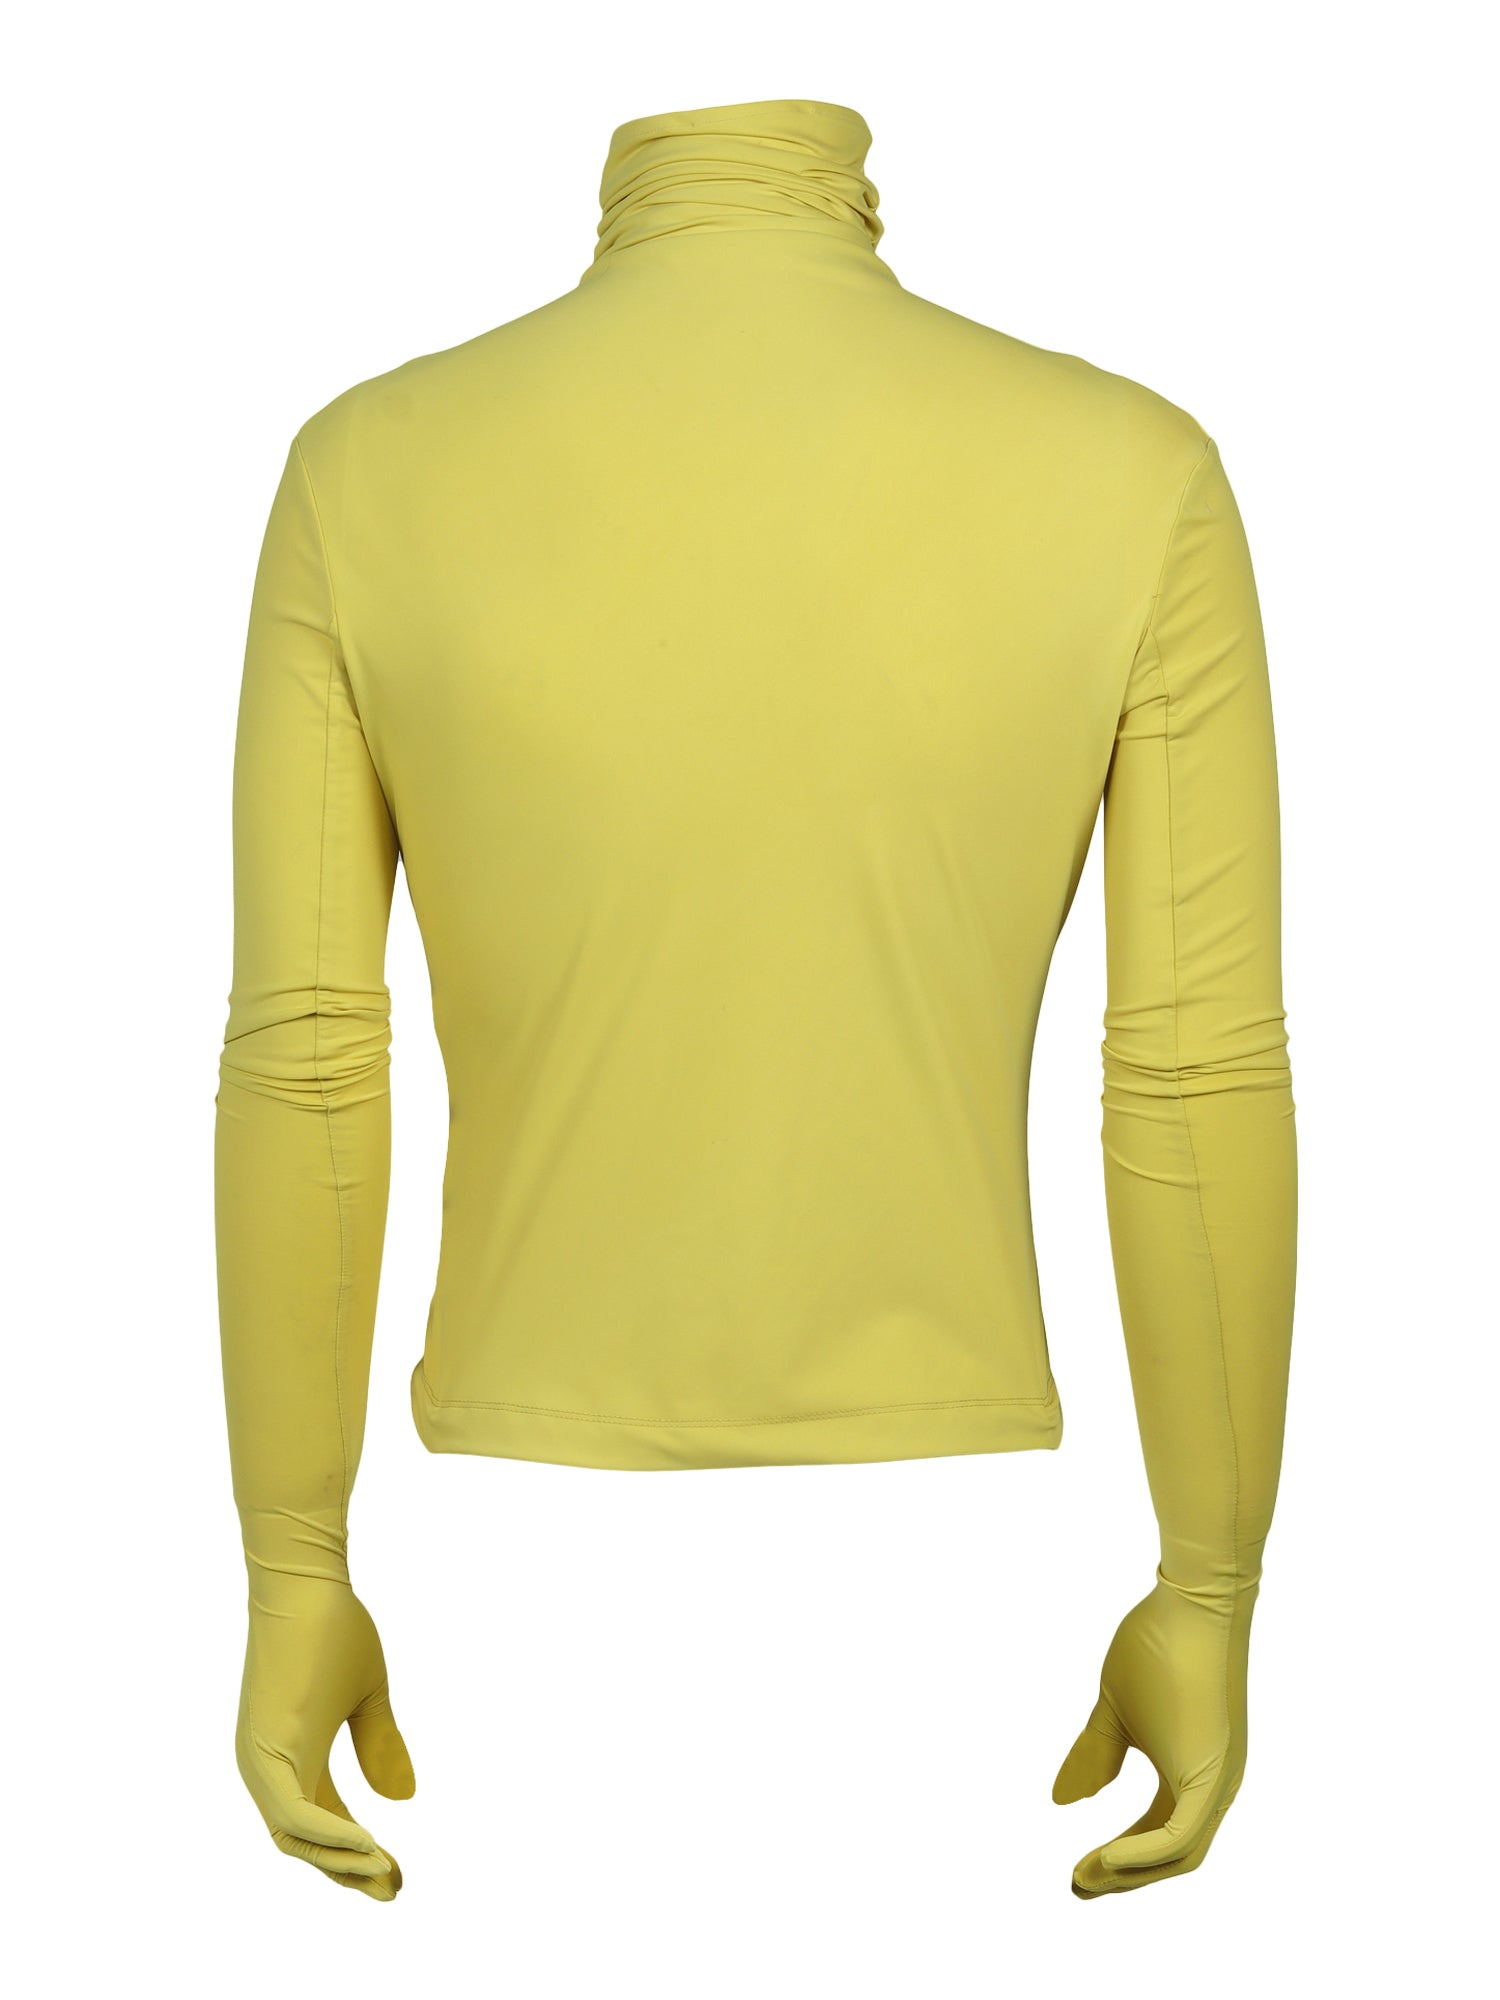 Yellow econyl gloved top